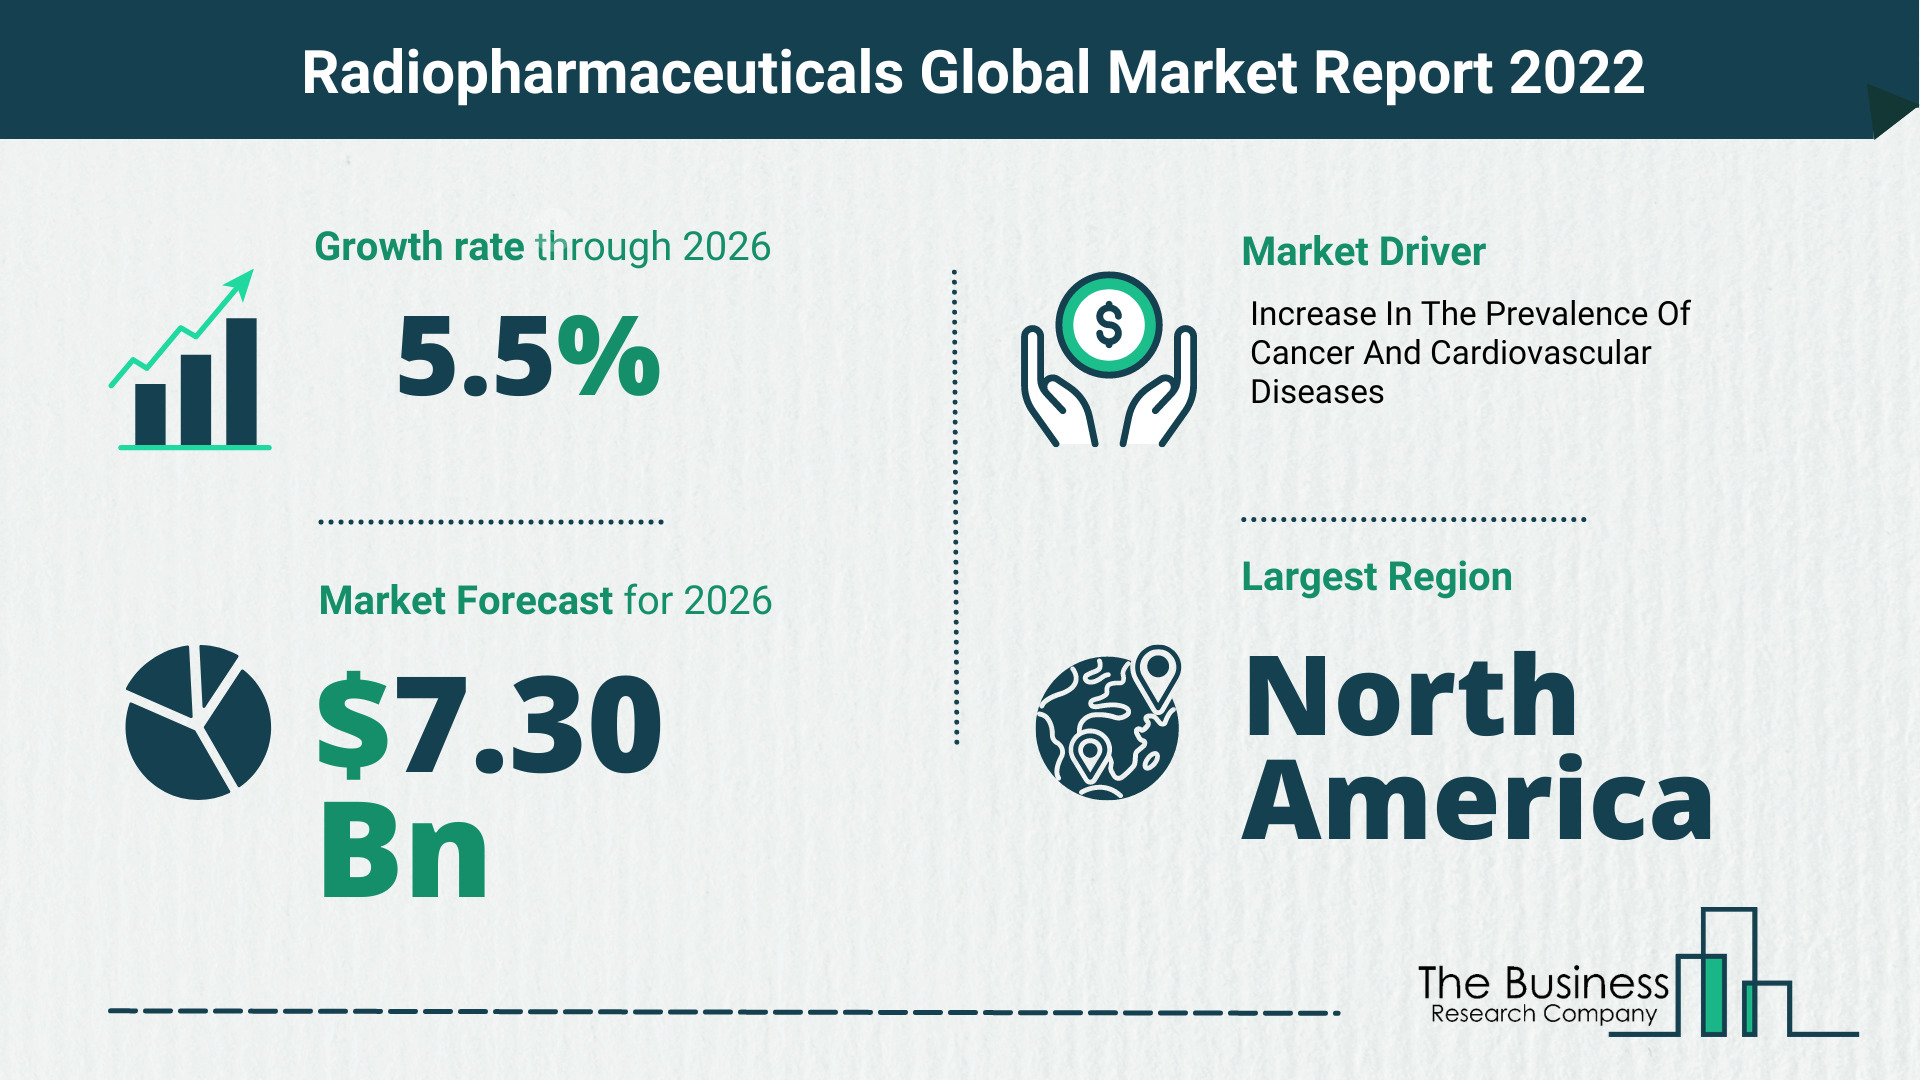 How Will The Radiopharmaceuticals Market Grow In 2022?